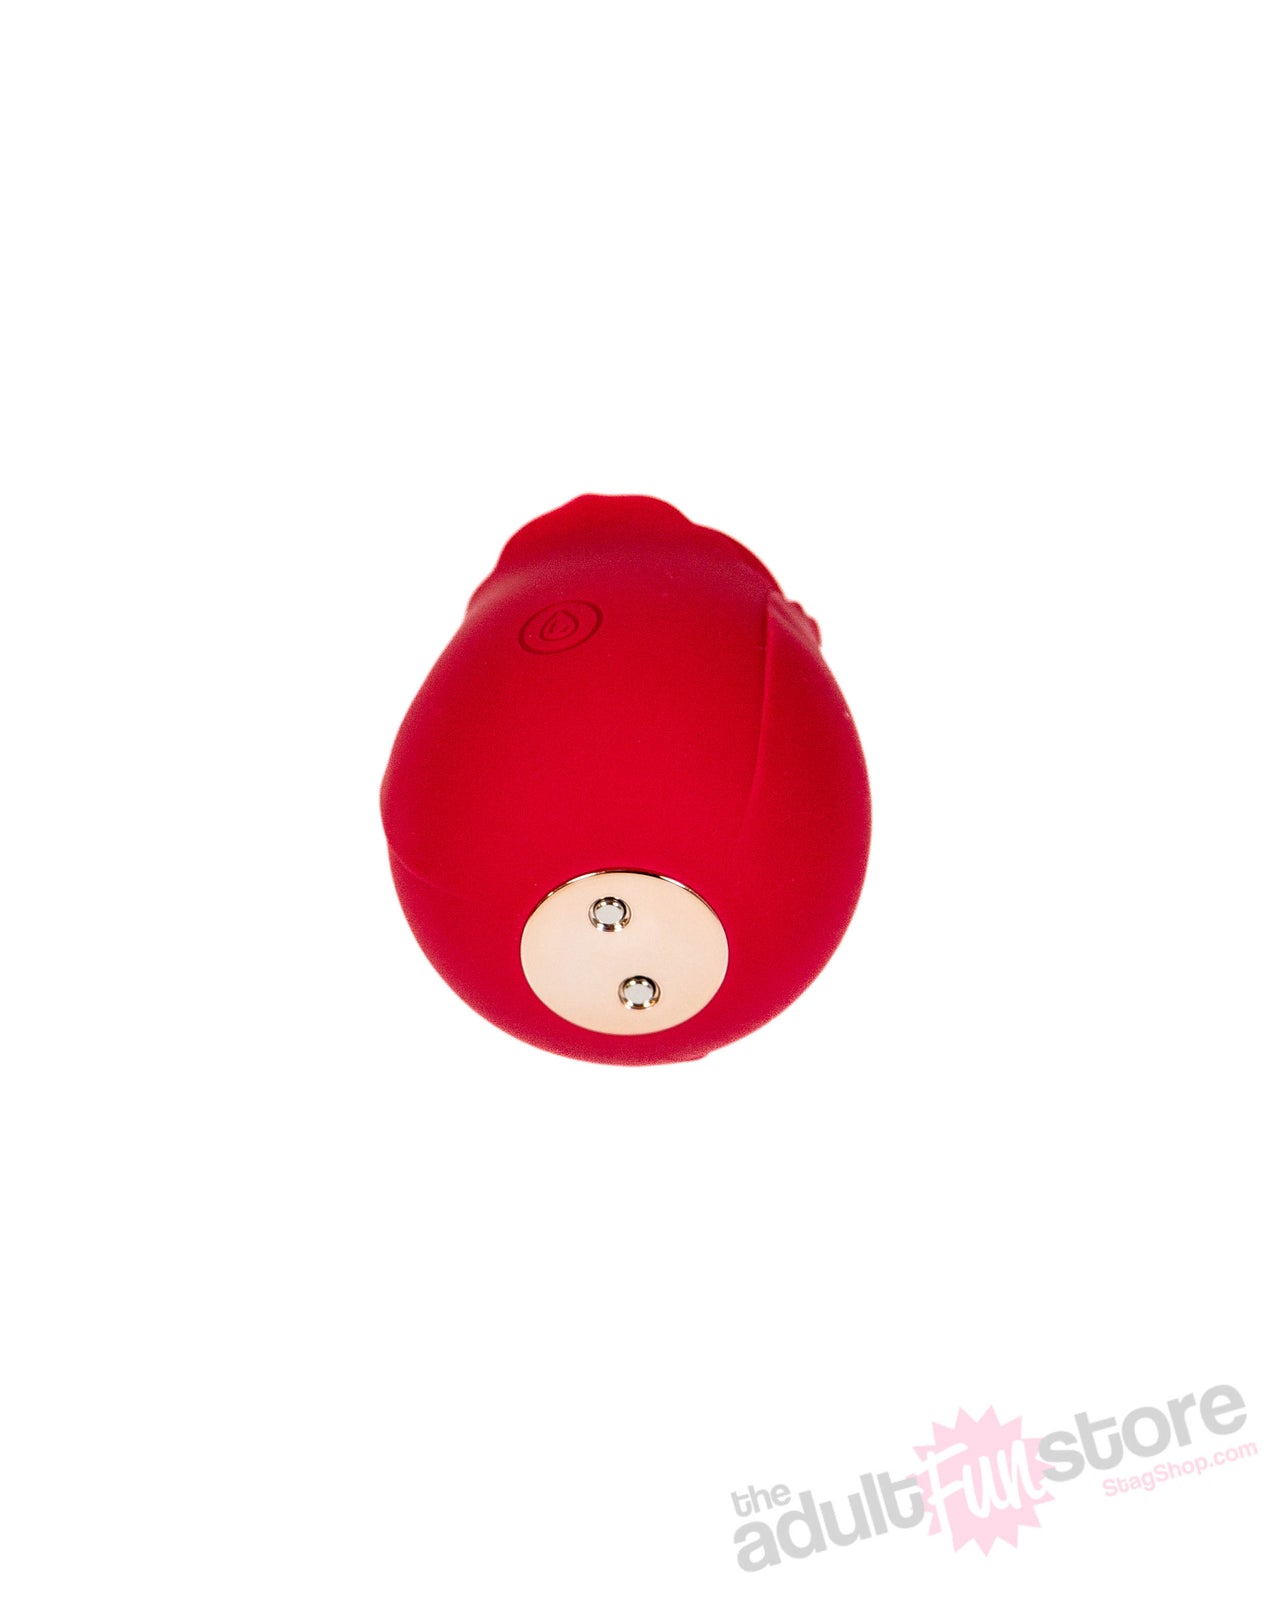 NS Novelties - INYA - The Rose Air Pleasure Vibrator - Rose Red - Stag Shop